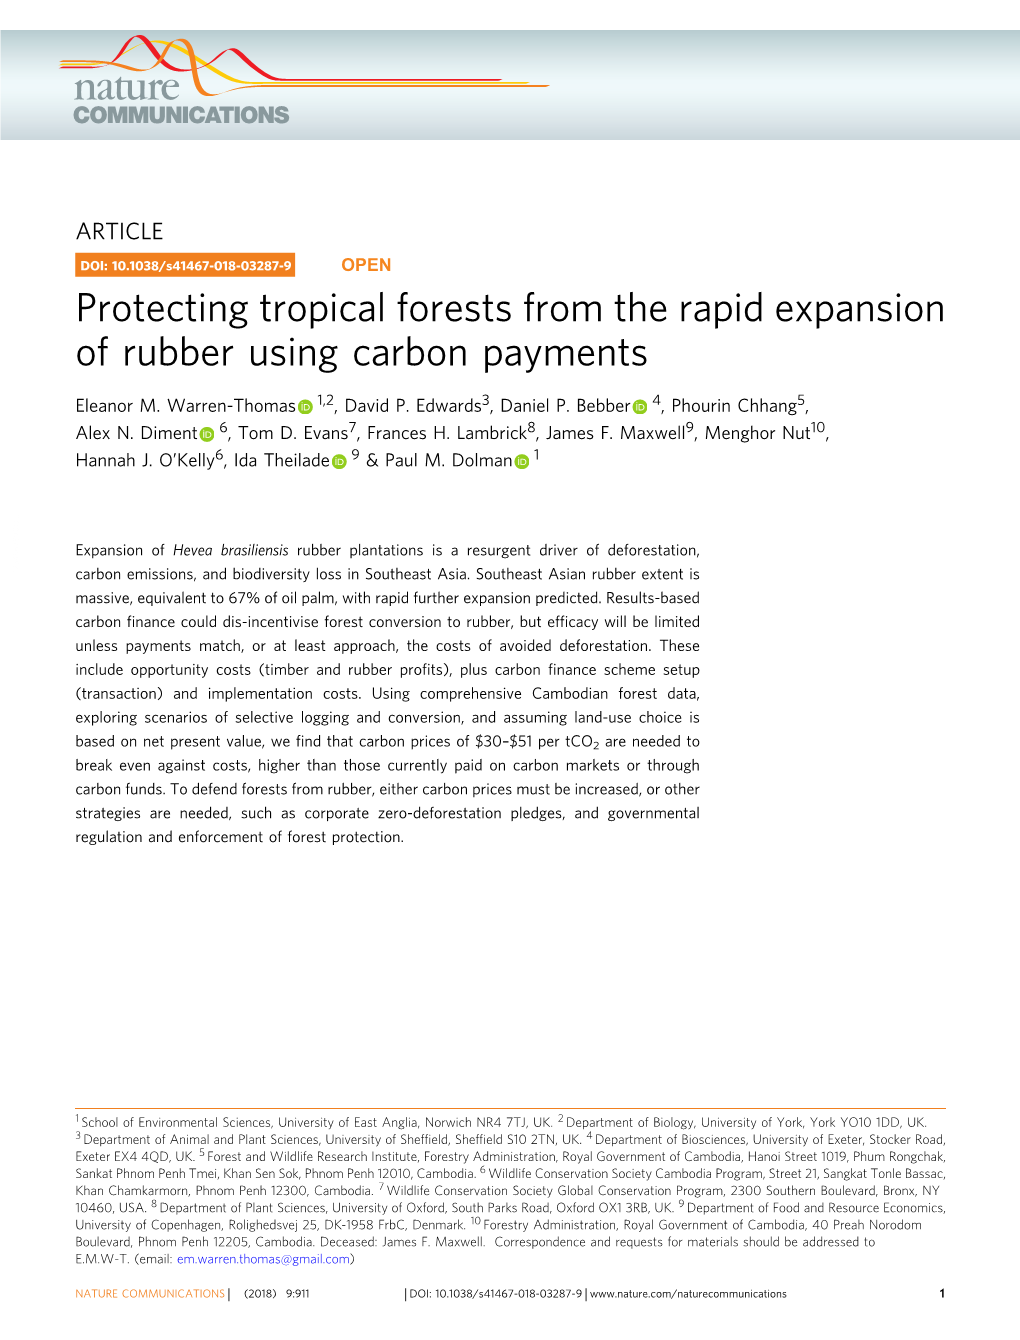 Protecting Tropical Forests from the Rapid Expansion of Rubber Using Carbon Payments